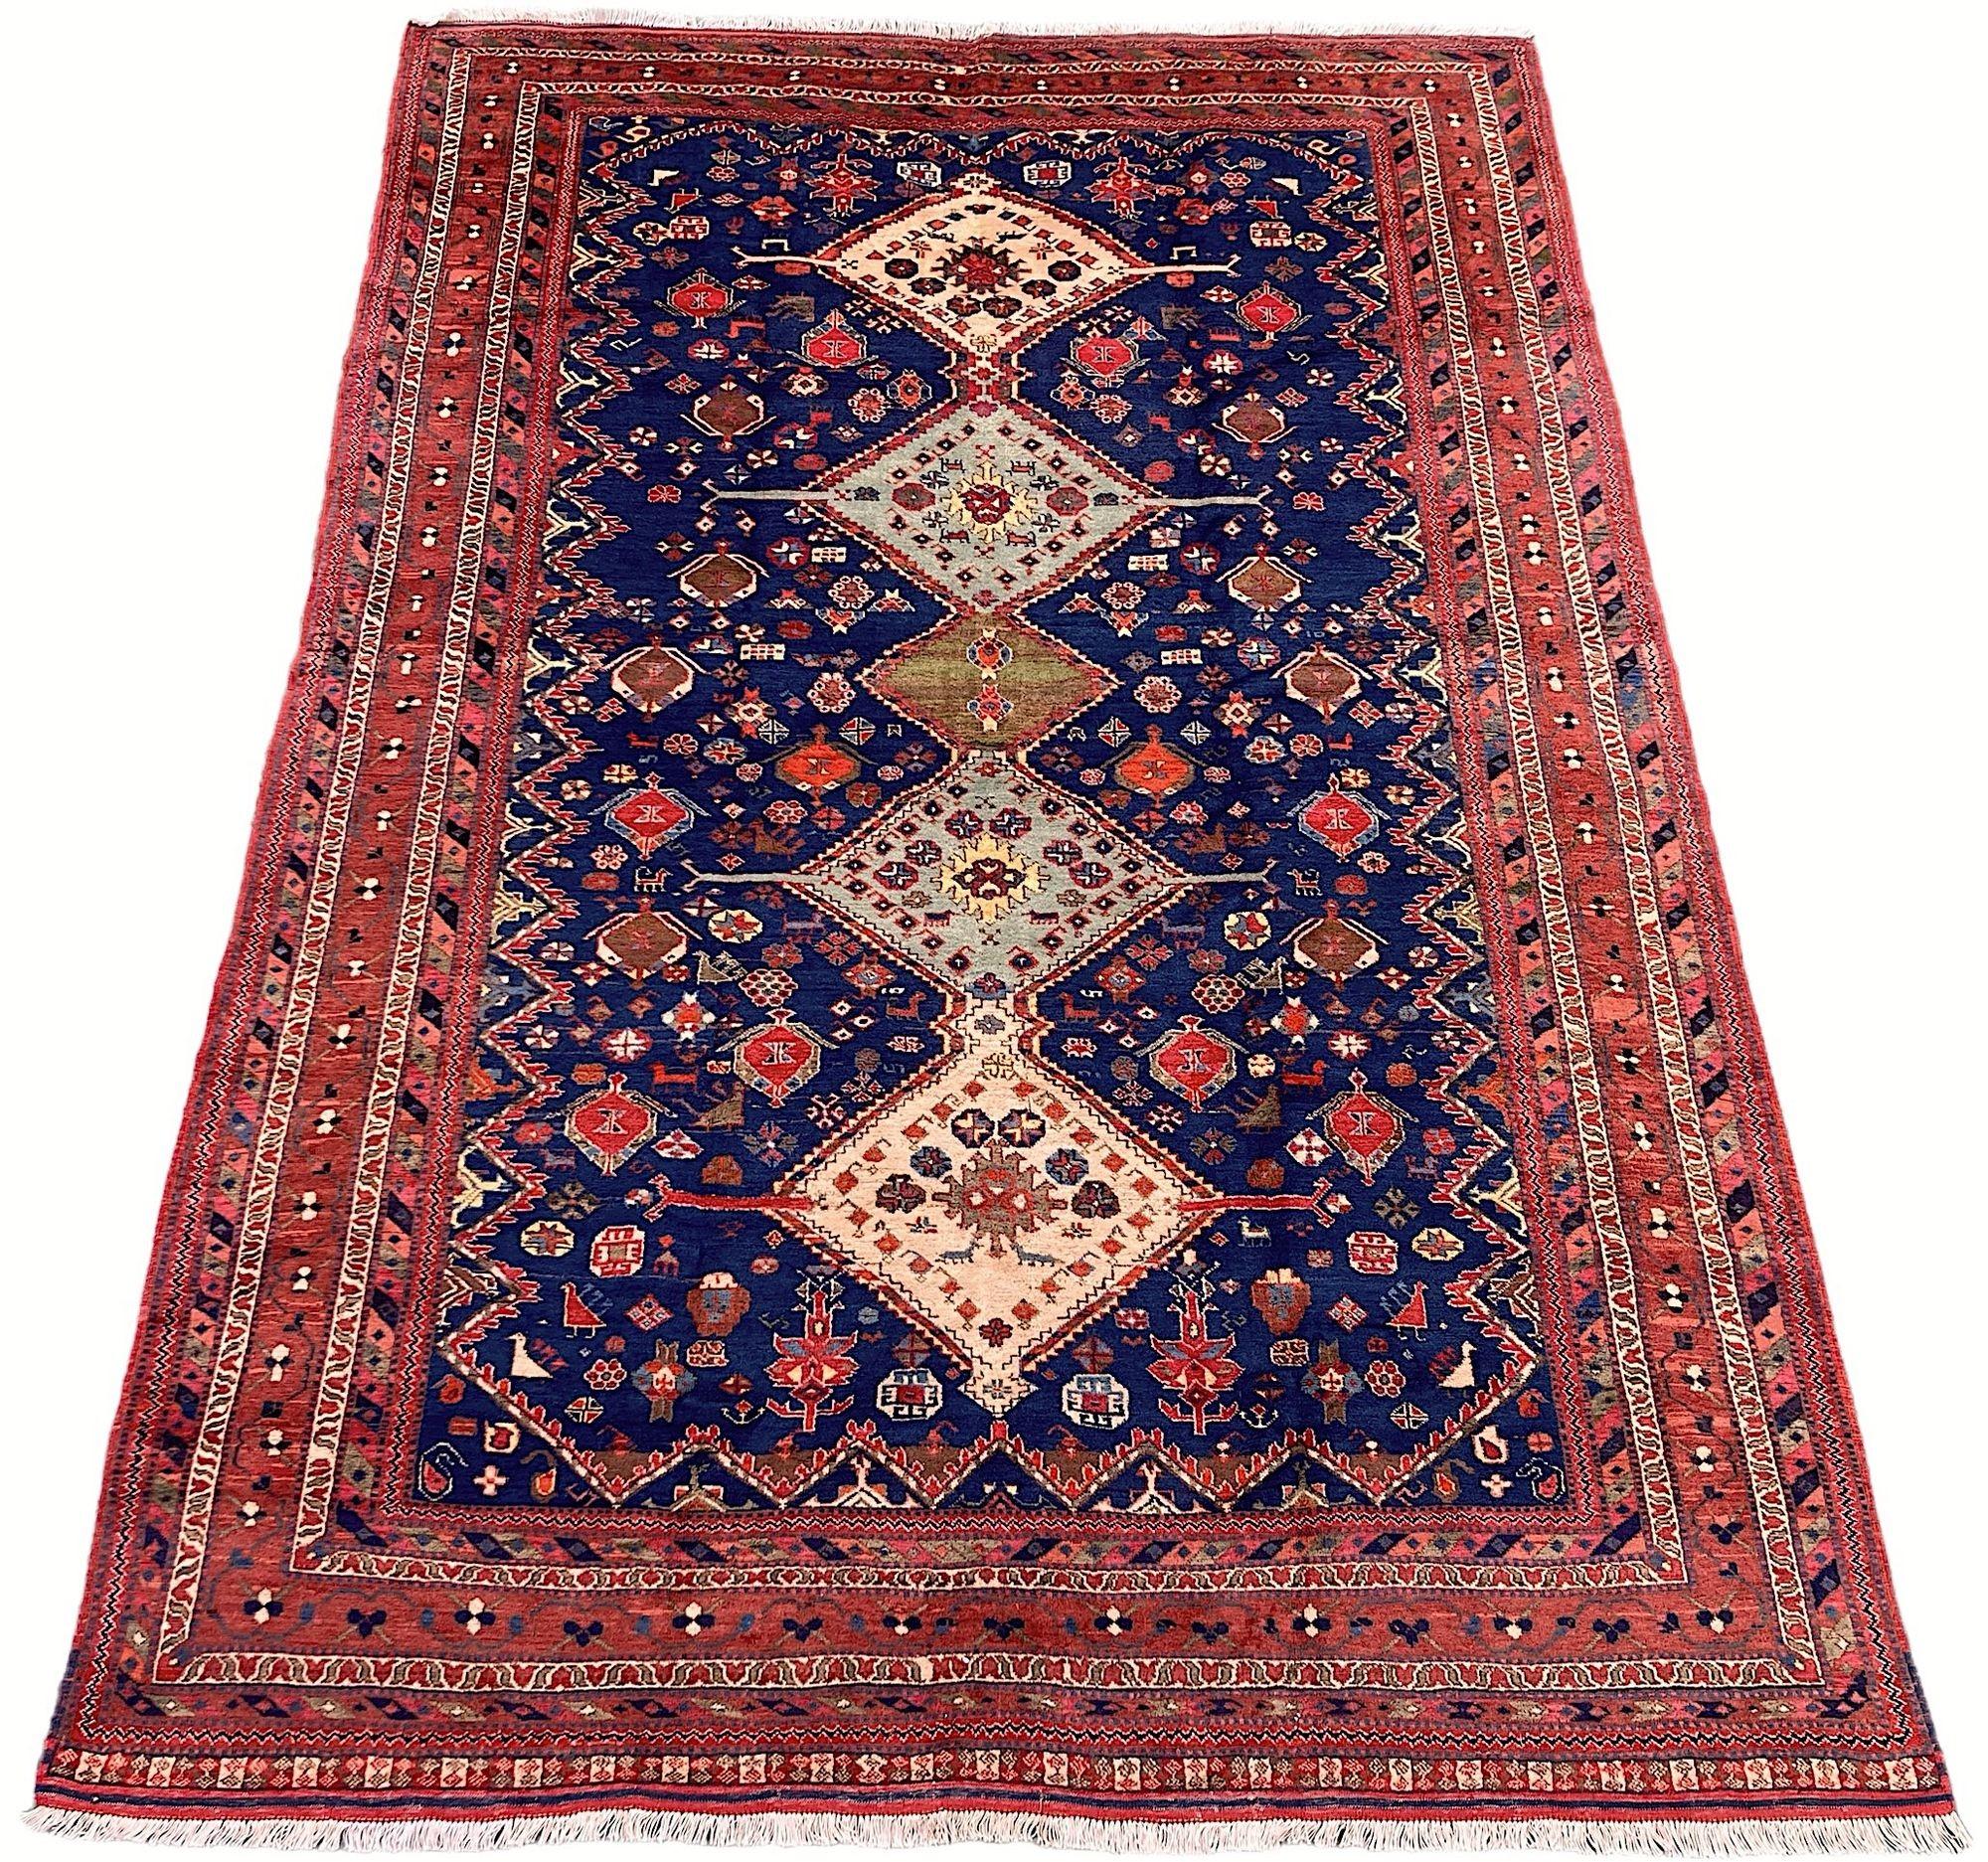 A lovely vintage Afshar carpet, hand woven circa 1940. The design features 5 geometrical medallions on a rich indigo field of stylised flowers and figures surrounded by an intimate terracotta border. Finely woven with soft, velvety wool and some